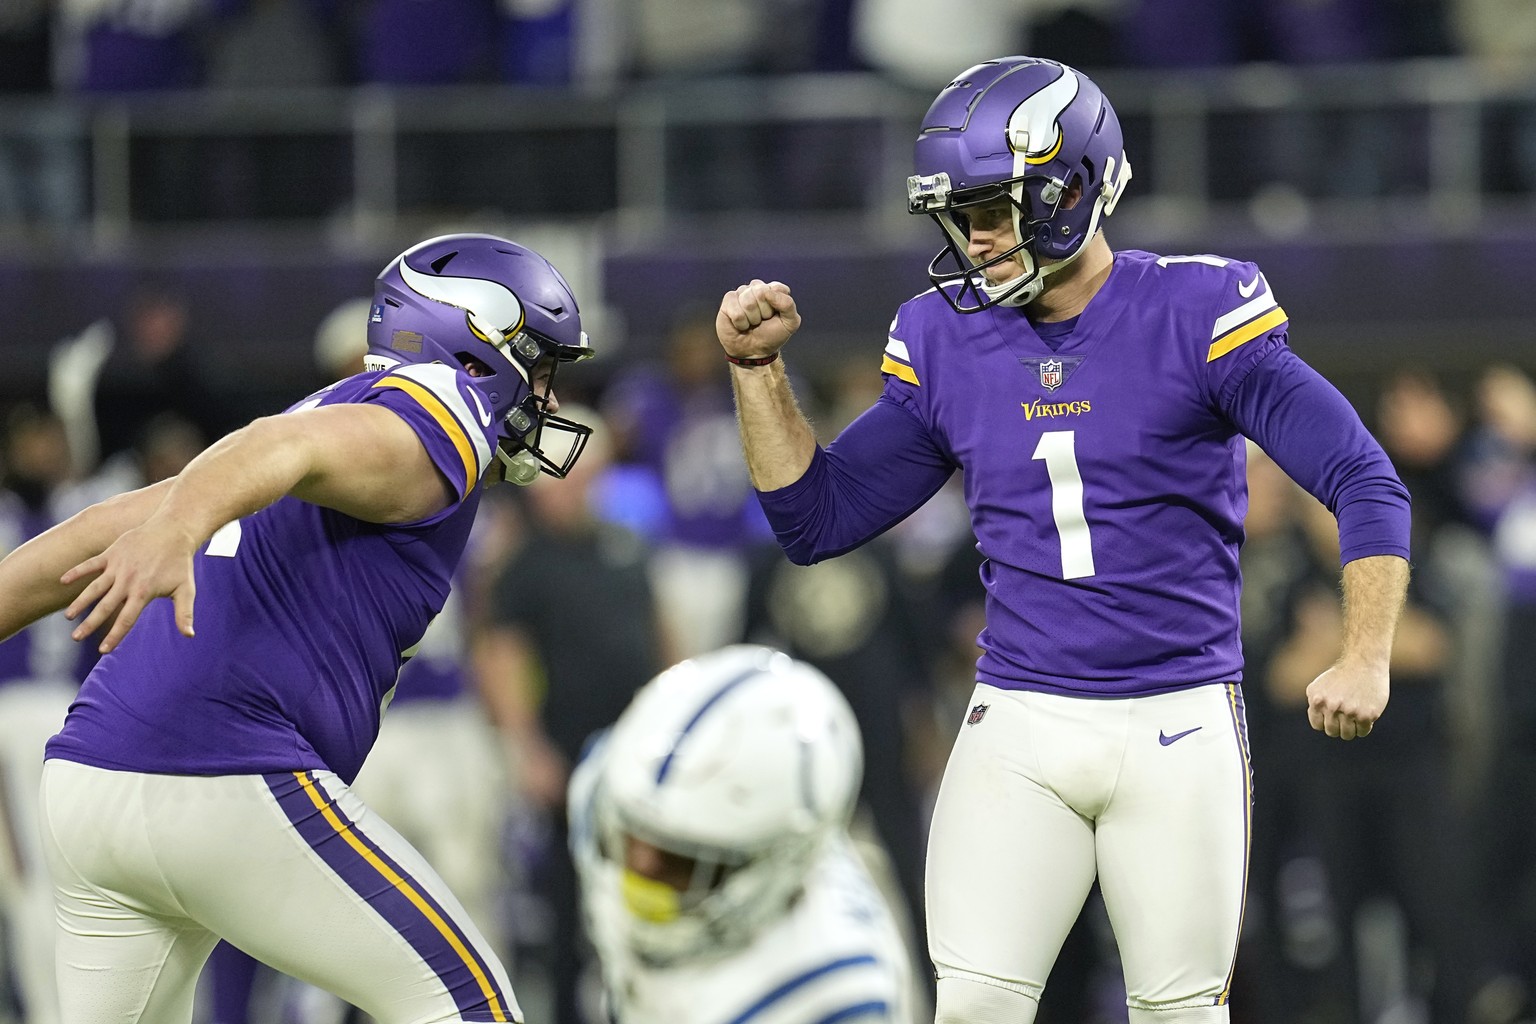 Minnesota Vikings place kicker Greg Joseph (1) celebrates after kicking a 40-yard field goal during overtime in an NFL football game against the Indianapolis Colts, Saturday, Dec. 17, 2022, in Minneap ...